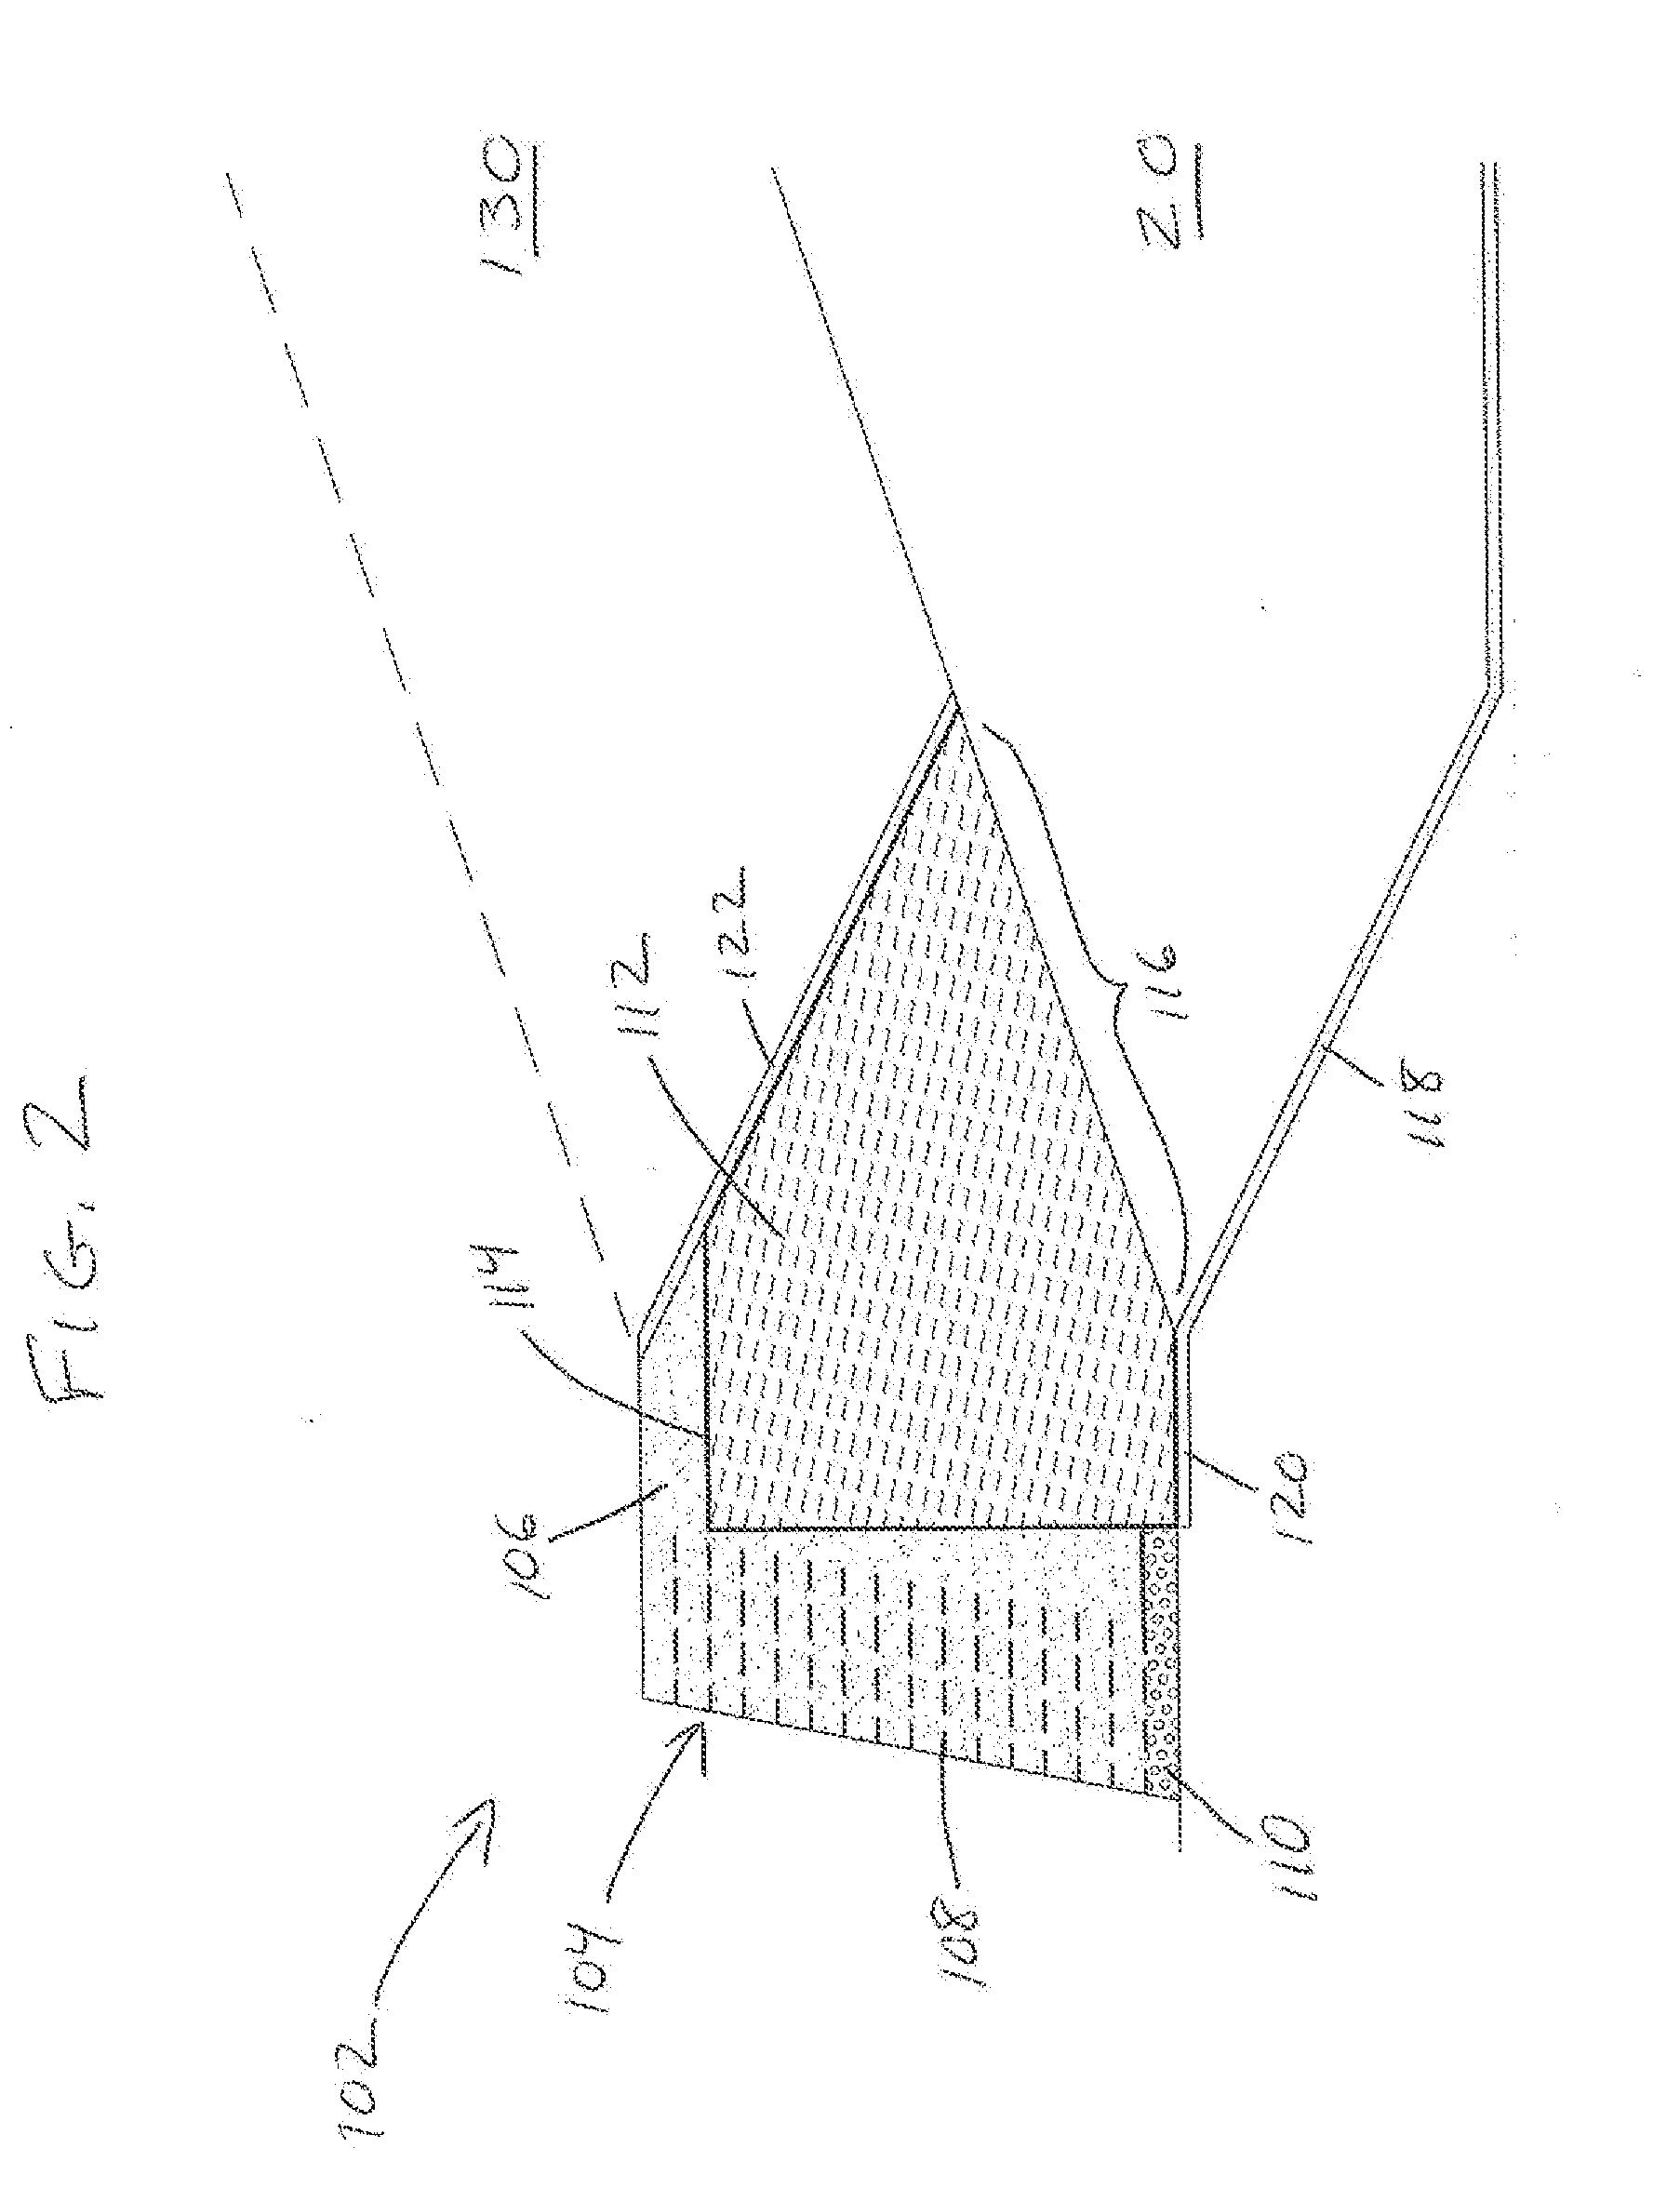 Berm and method of construction thereof